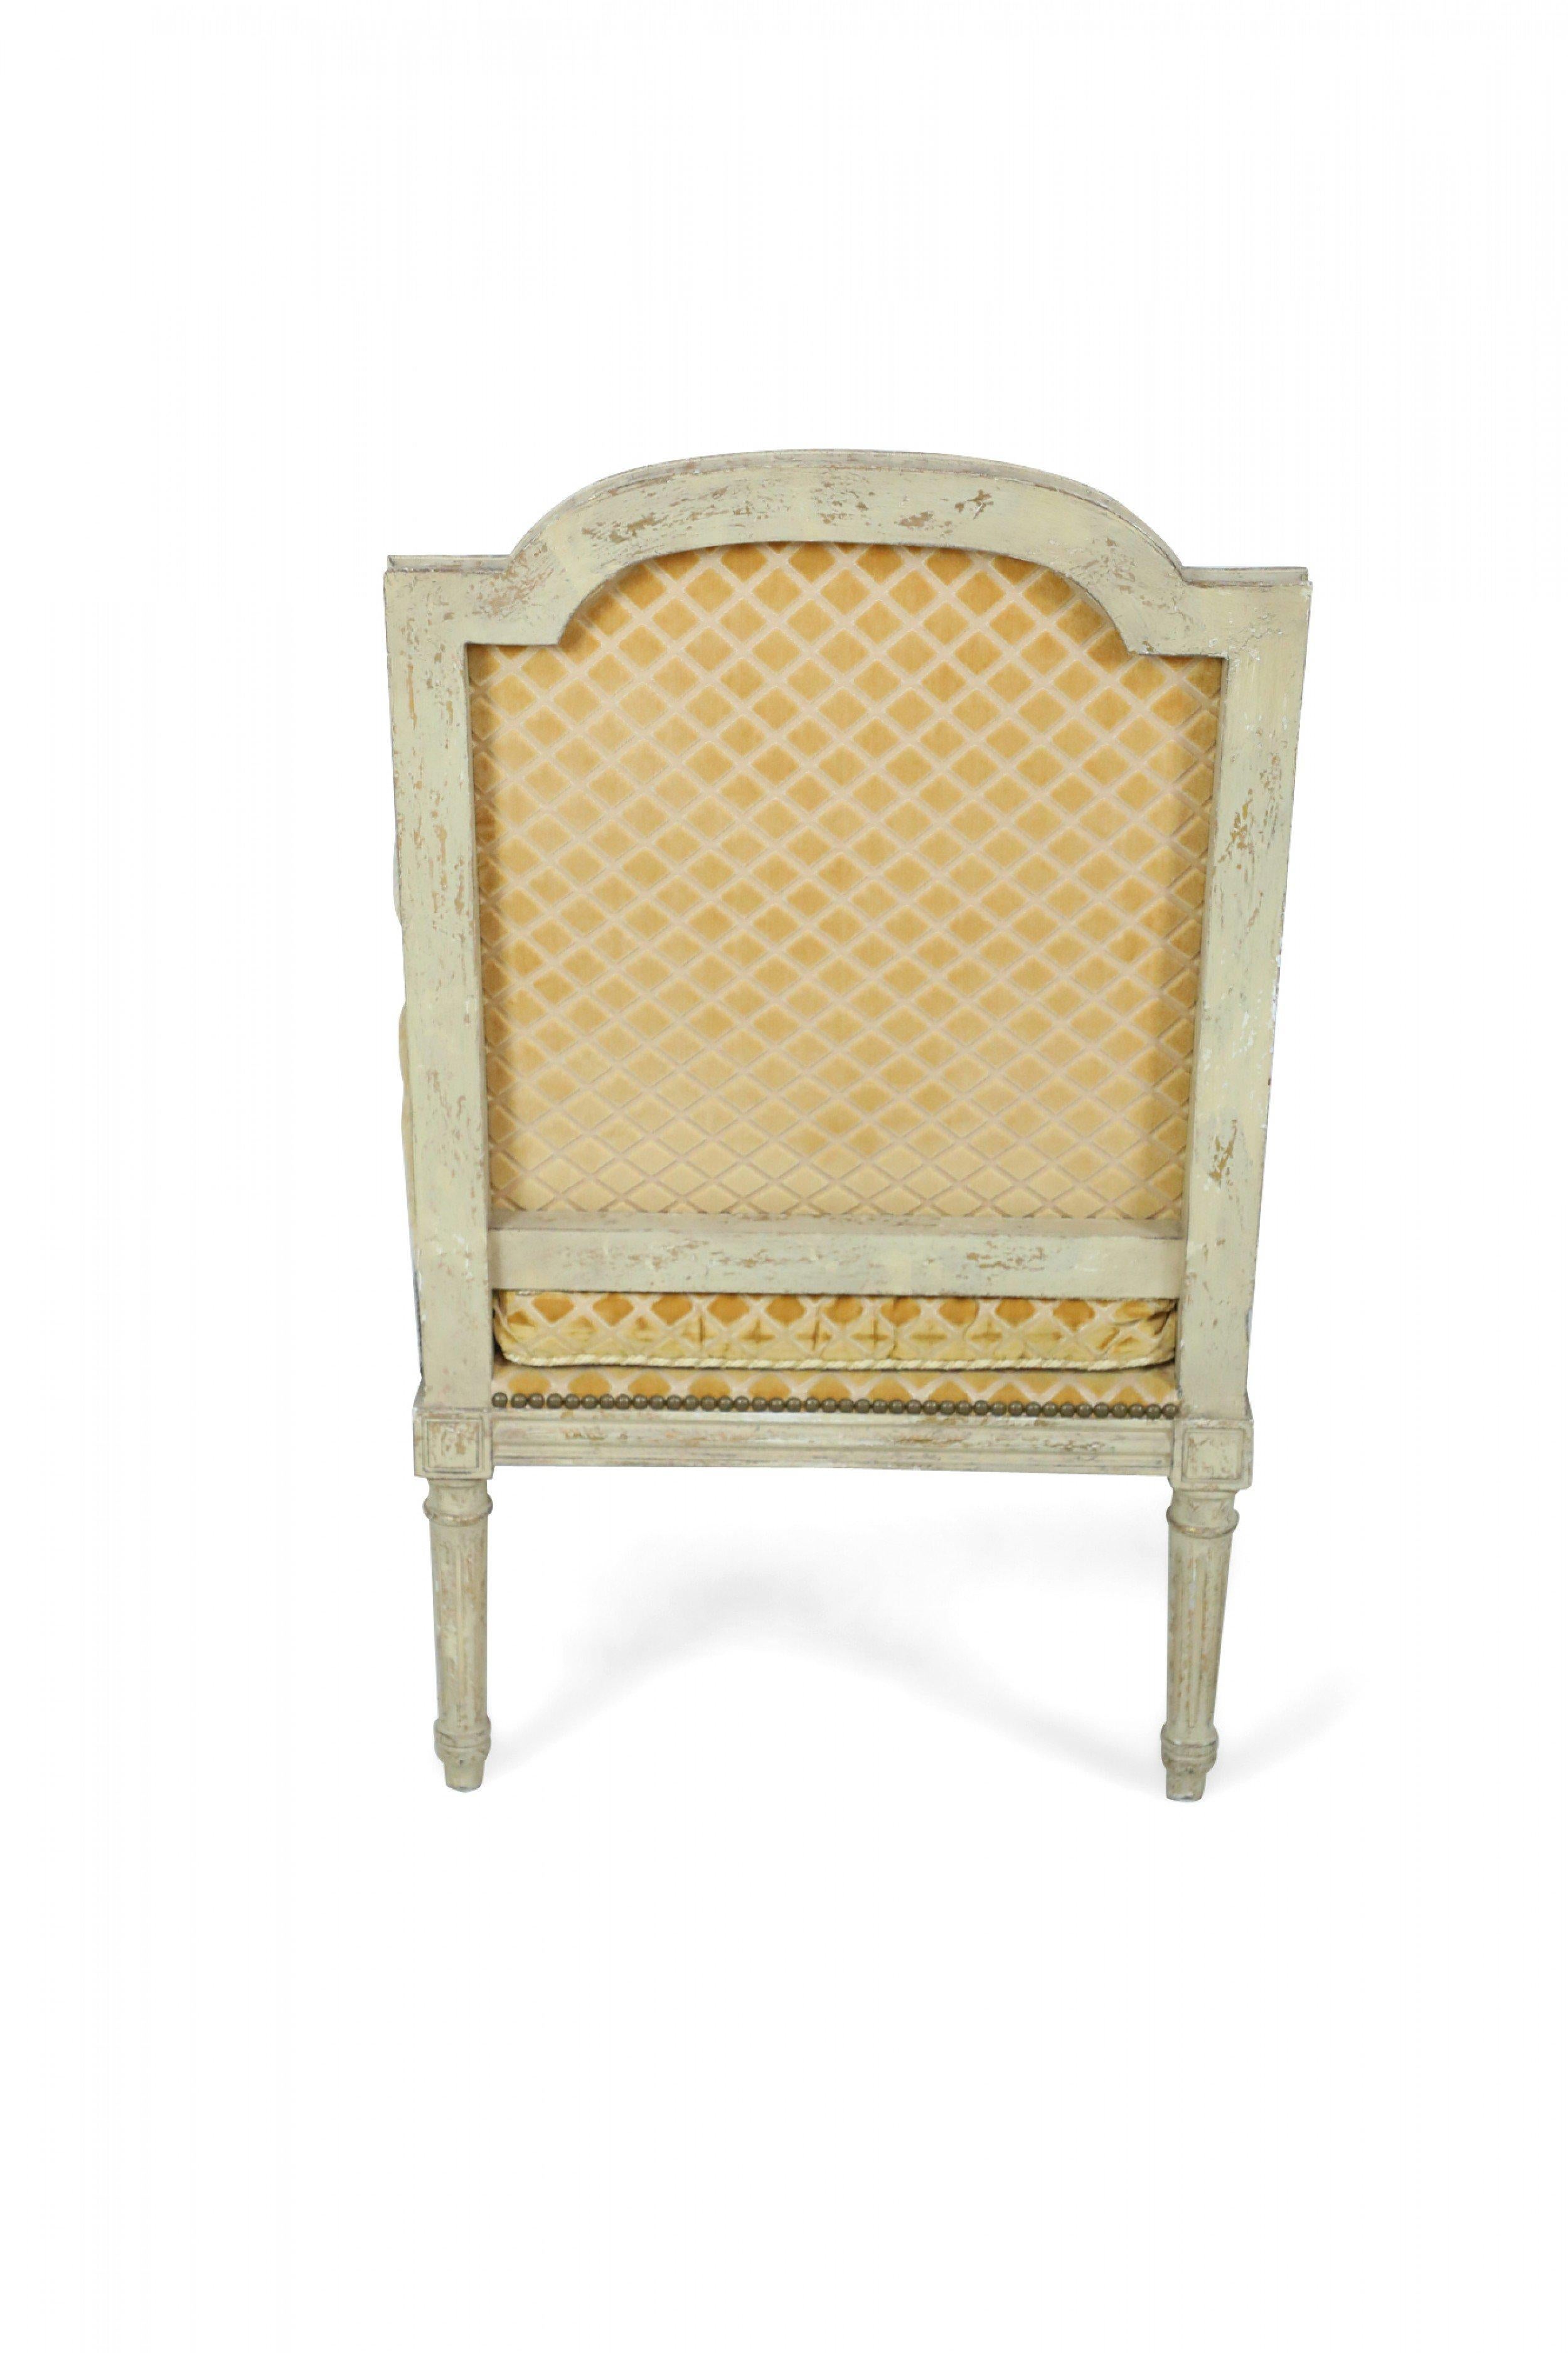 Pair of Louis XVI-style (19/20th Century) fauteuils / armchairs with distressed grey painted frames on turned fluted legs having a gold diamond-patterned upholstery on seats, backs, and arm rests with decorative metal nail heads (priced as pair).
 